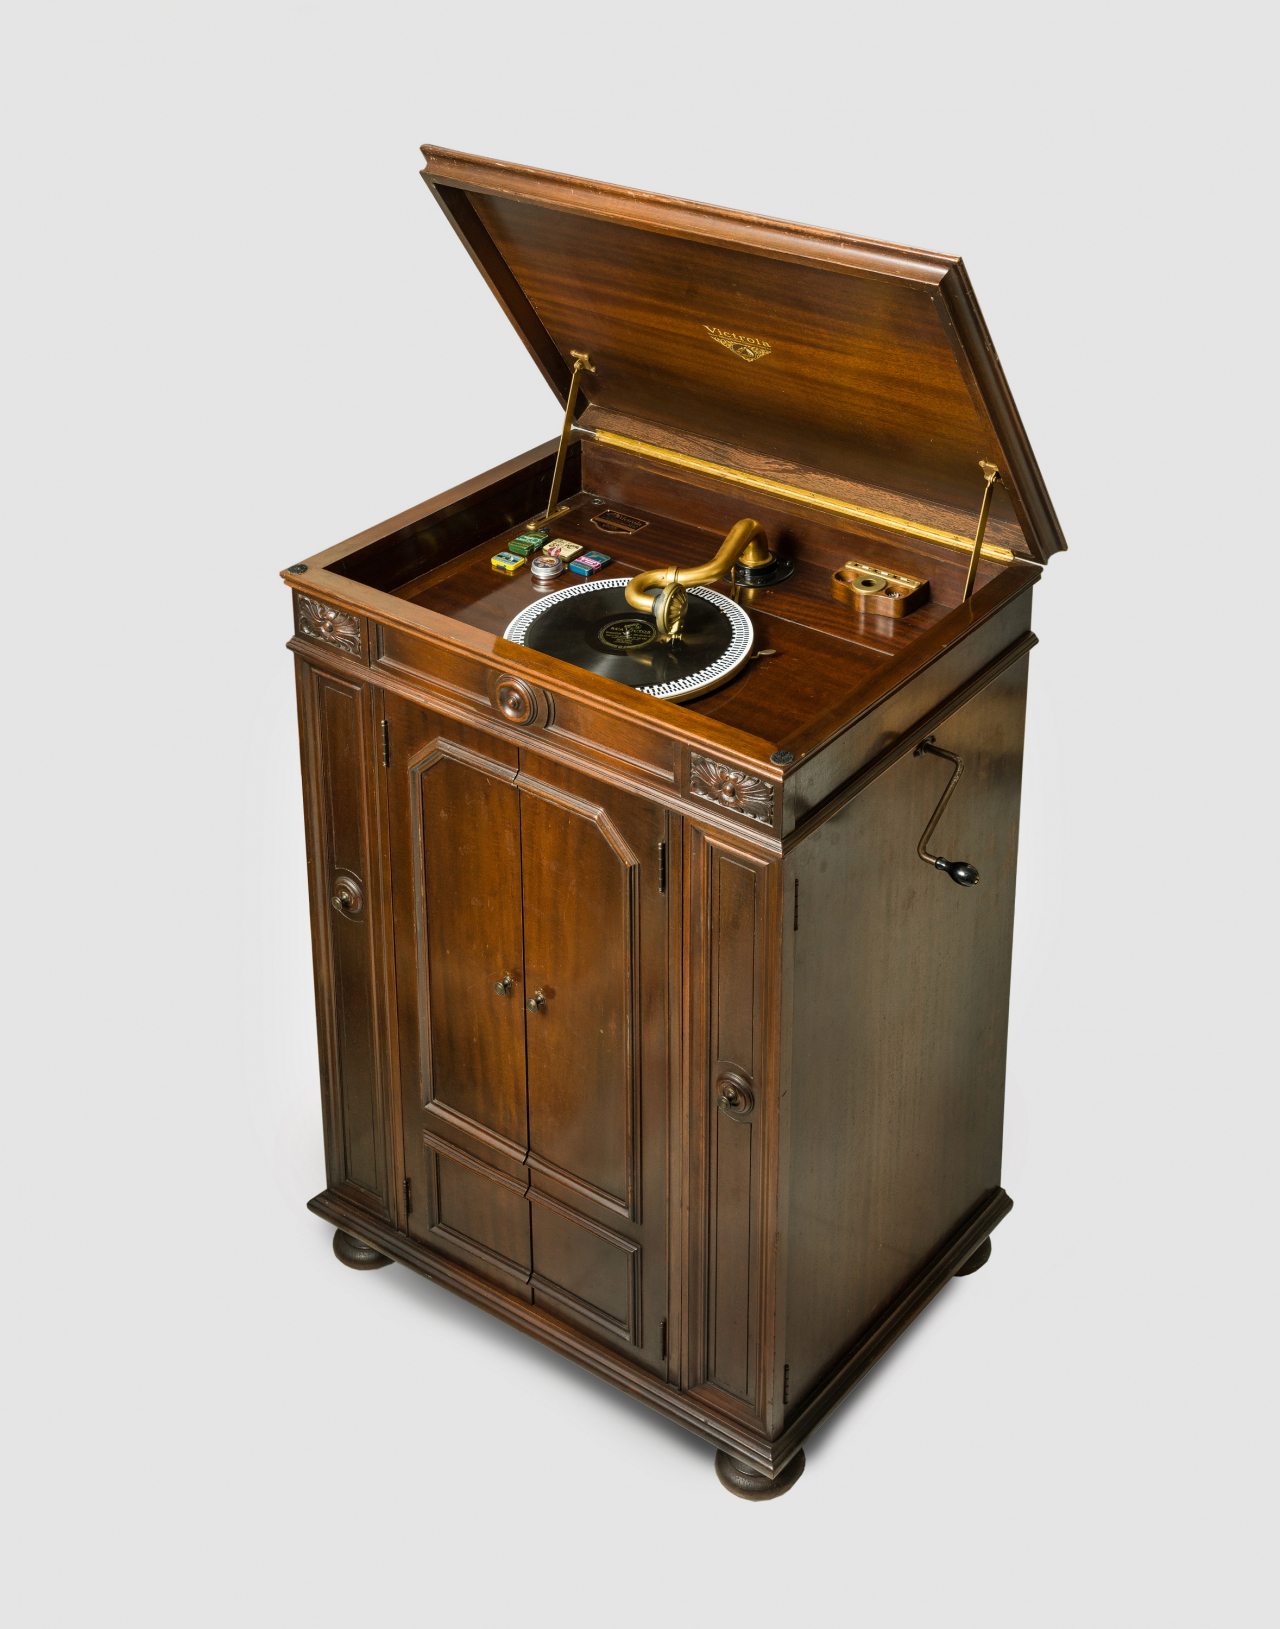 A 1925 Credenza gramophone located at the second floor of the “House of Records, See the Sound